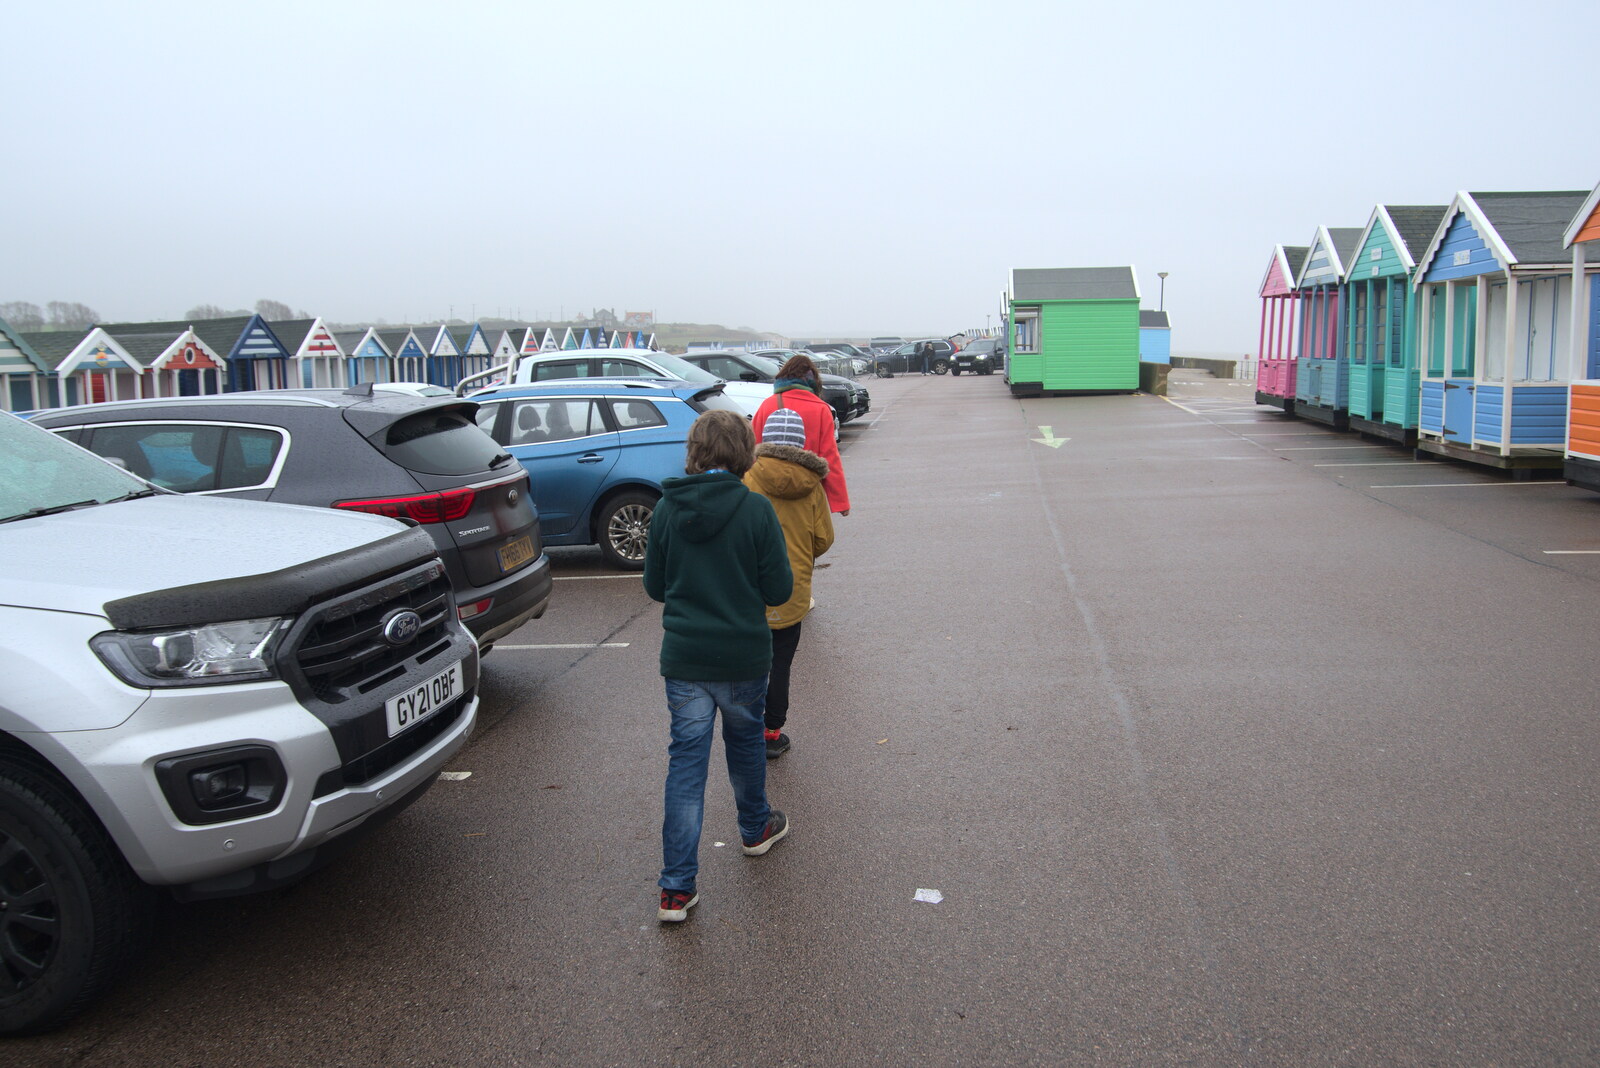 We head back to the car from A Few Hours at the Seaside, Southwold, Suffolk - 27th December 2021